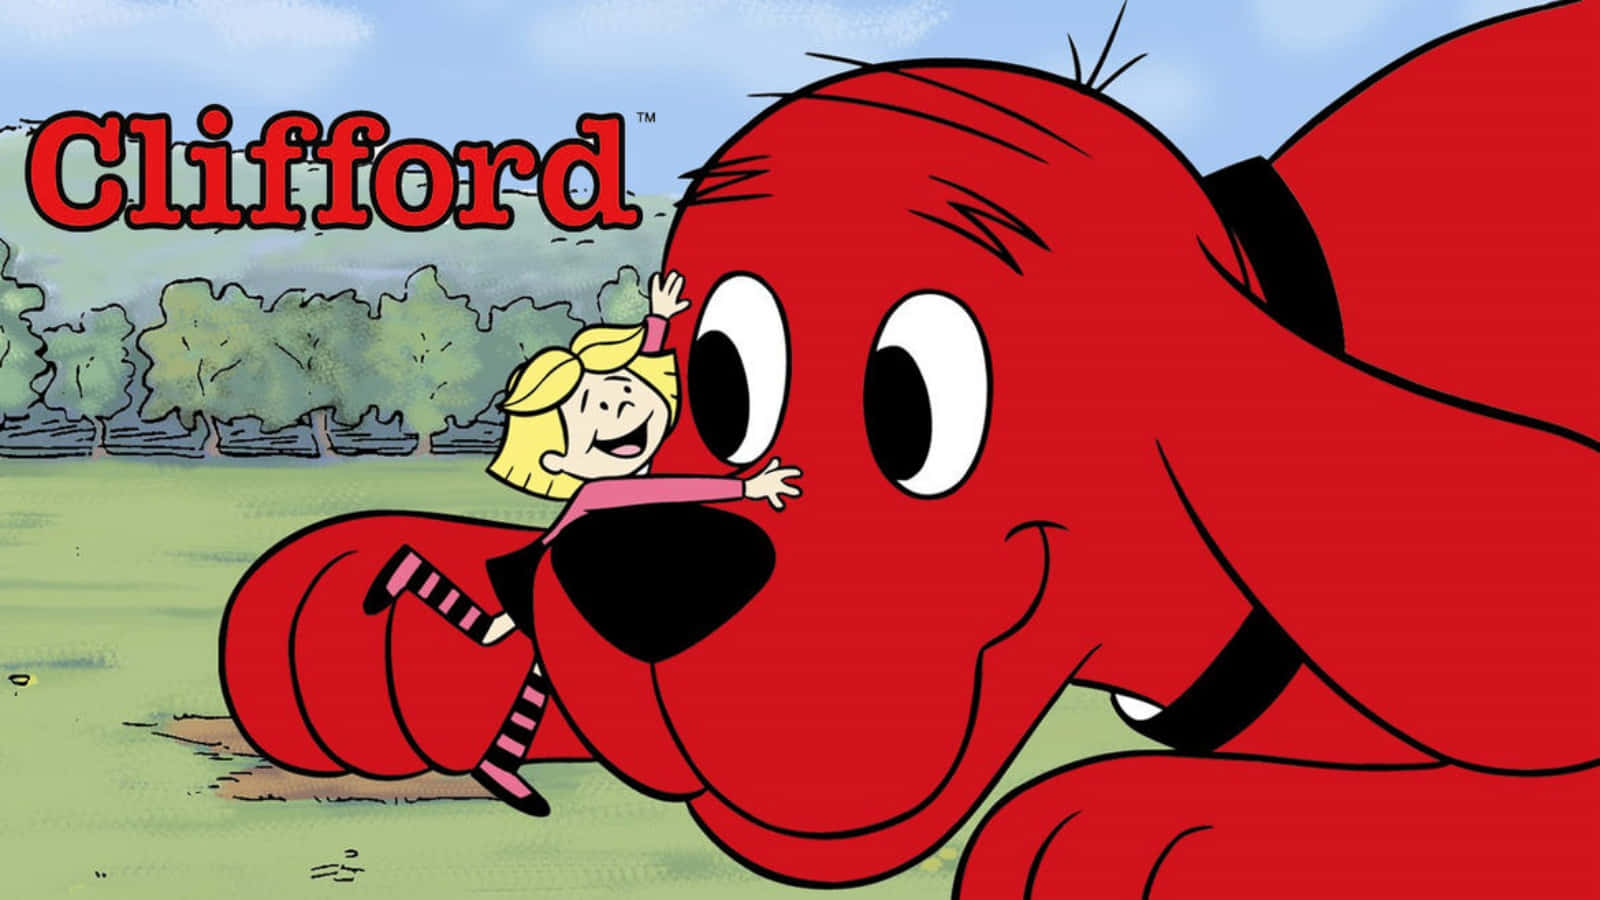 Clifford The Big Red Dog's warm, welcoming smile